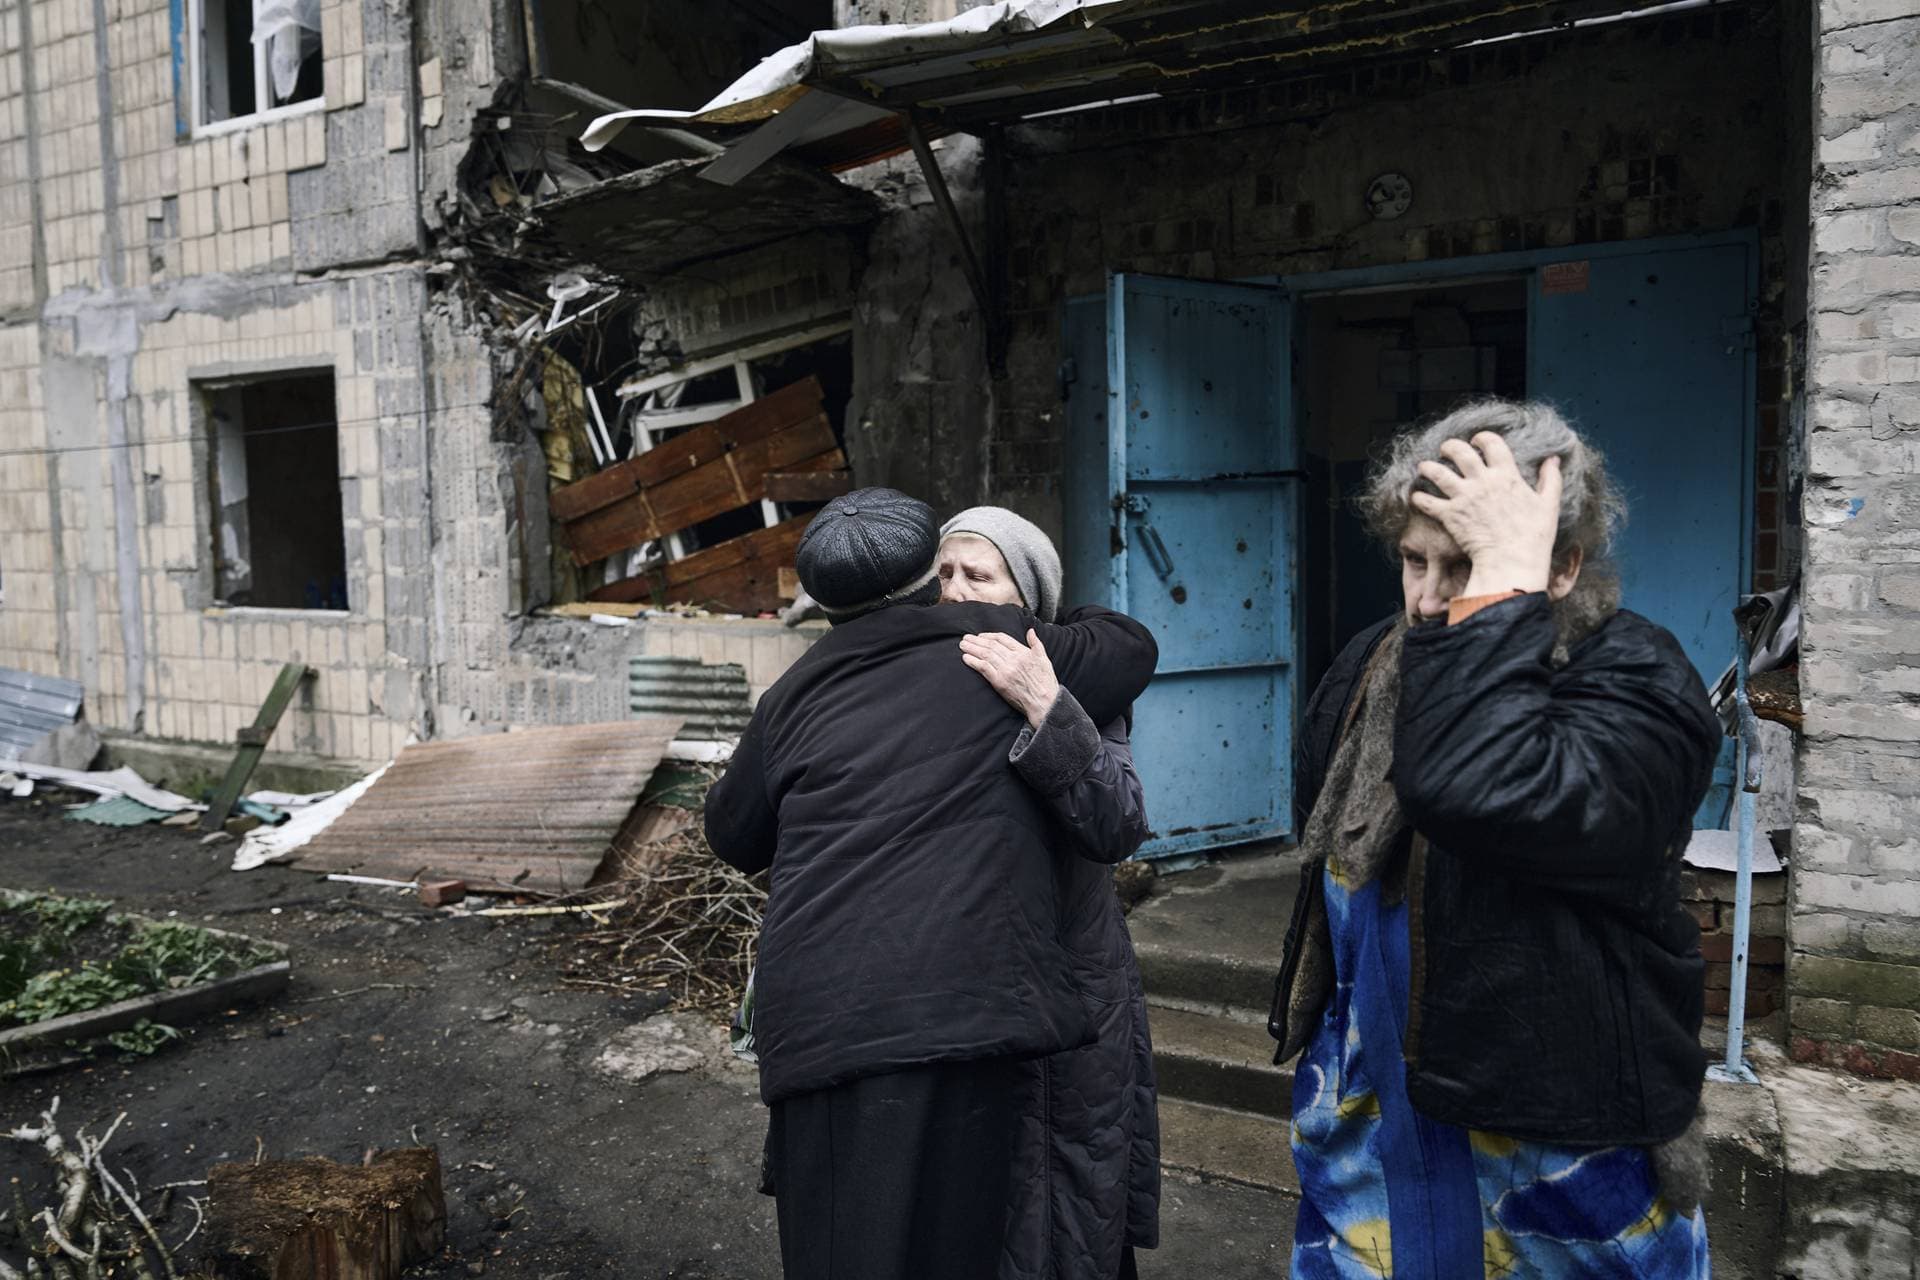 Local residents say goodbye to their neighbor as she leaves her home in war-hit Avdiivka